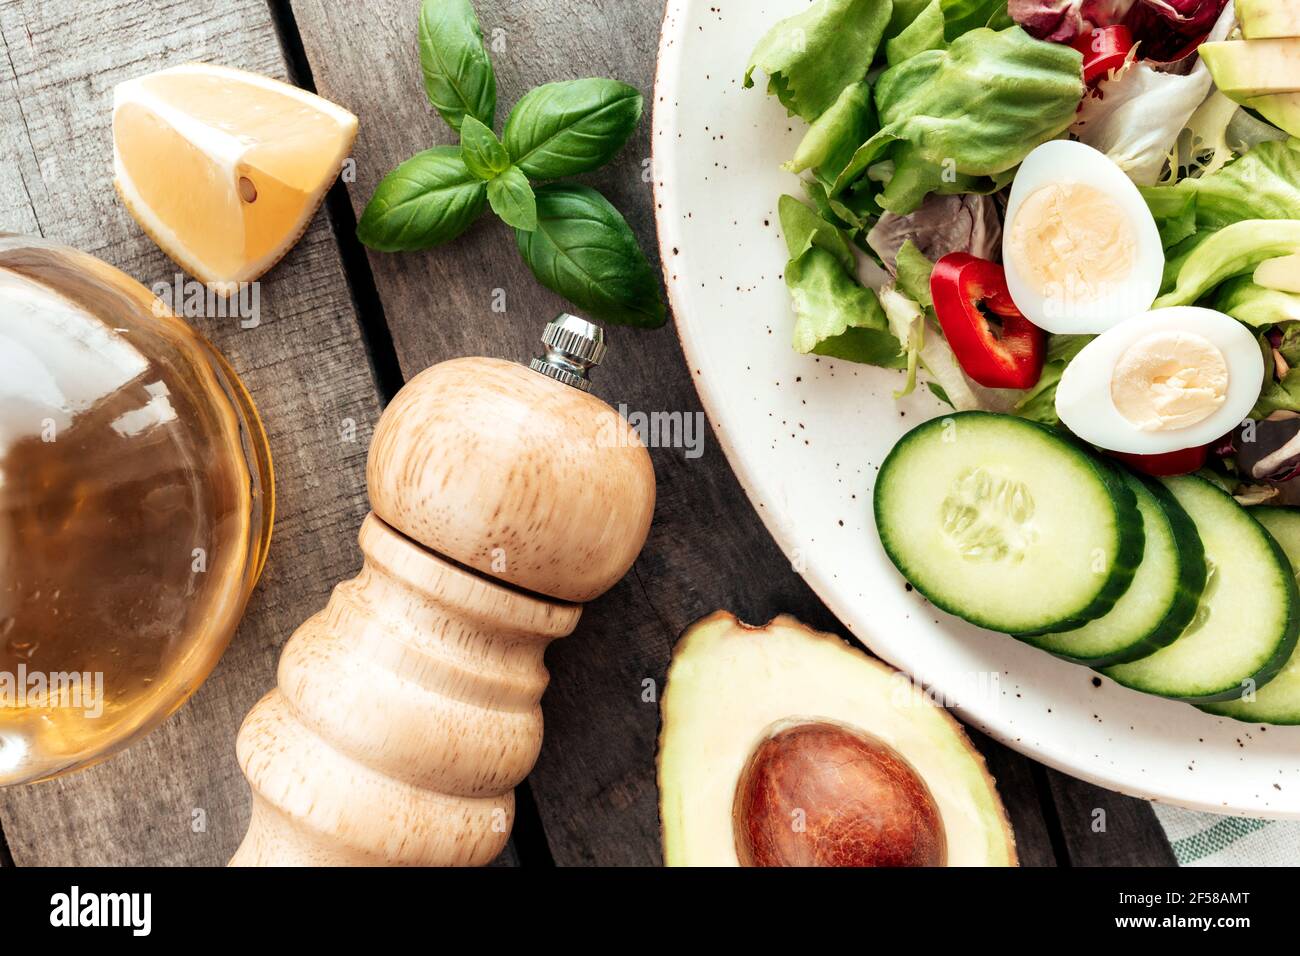 Healthy eating concept flat lay. Mediterranean diet, plate with lettuce salad leaves, quail eggs, avocado half with kernel, cucumber slices, pepper, b Stock Photo